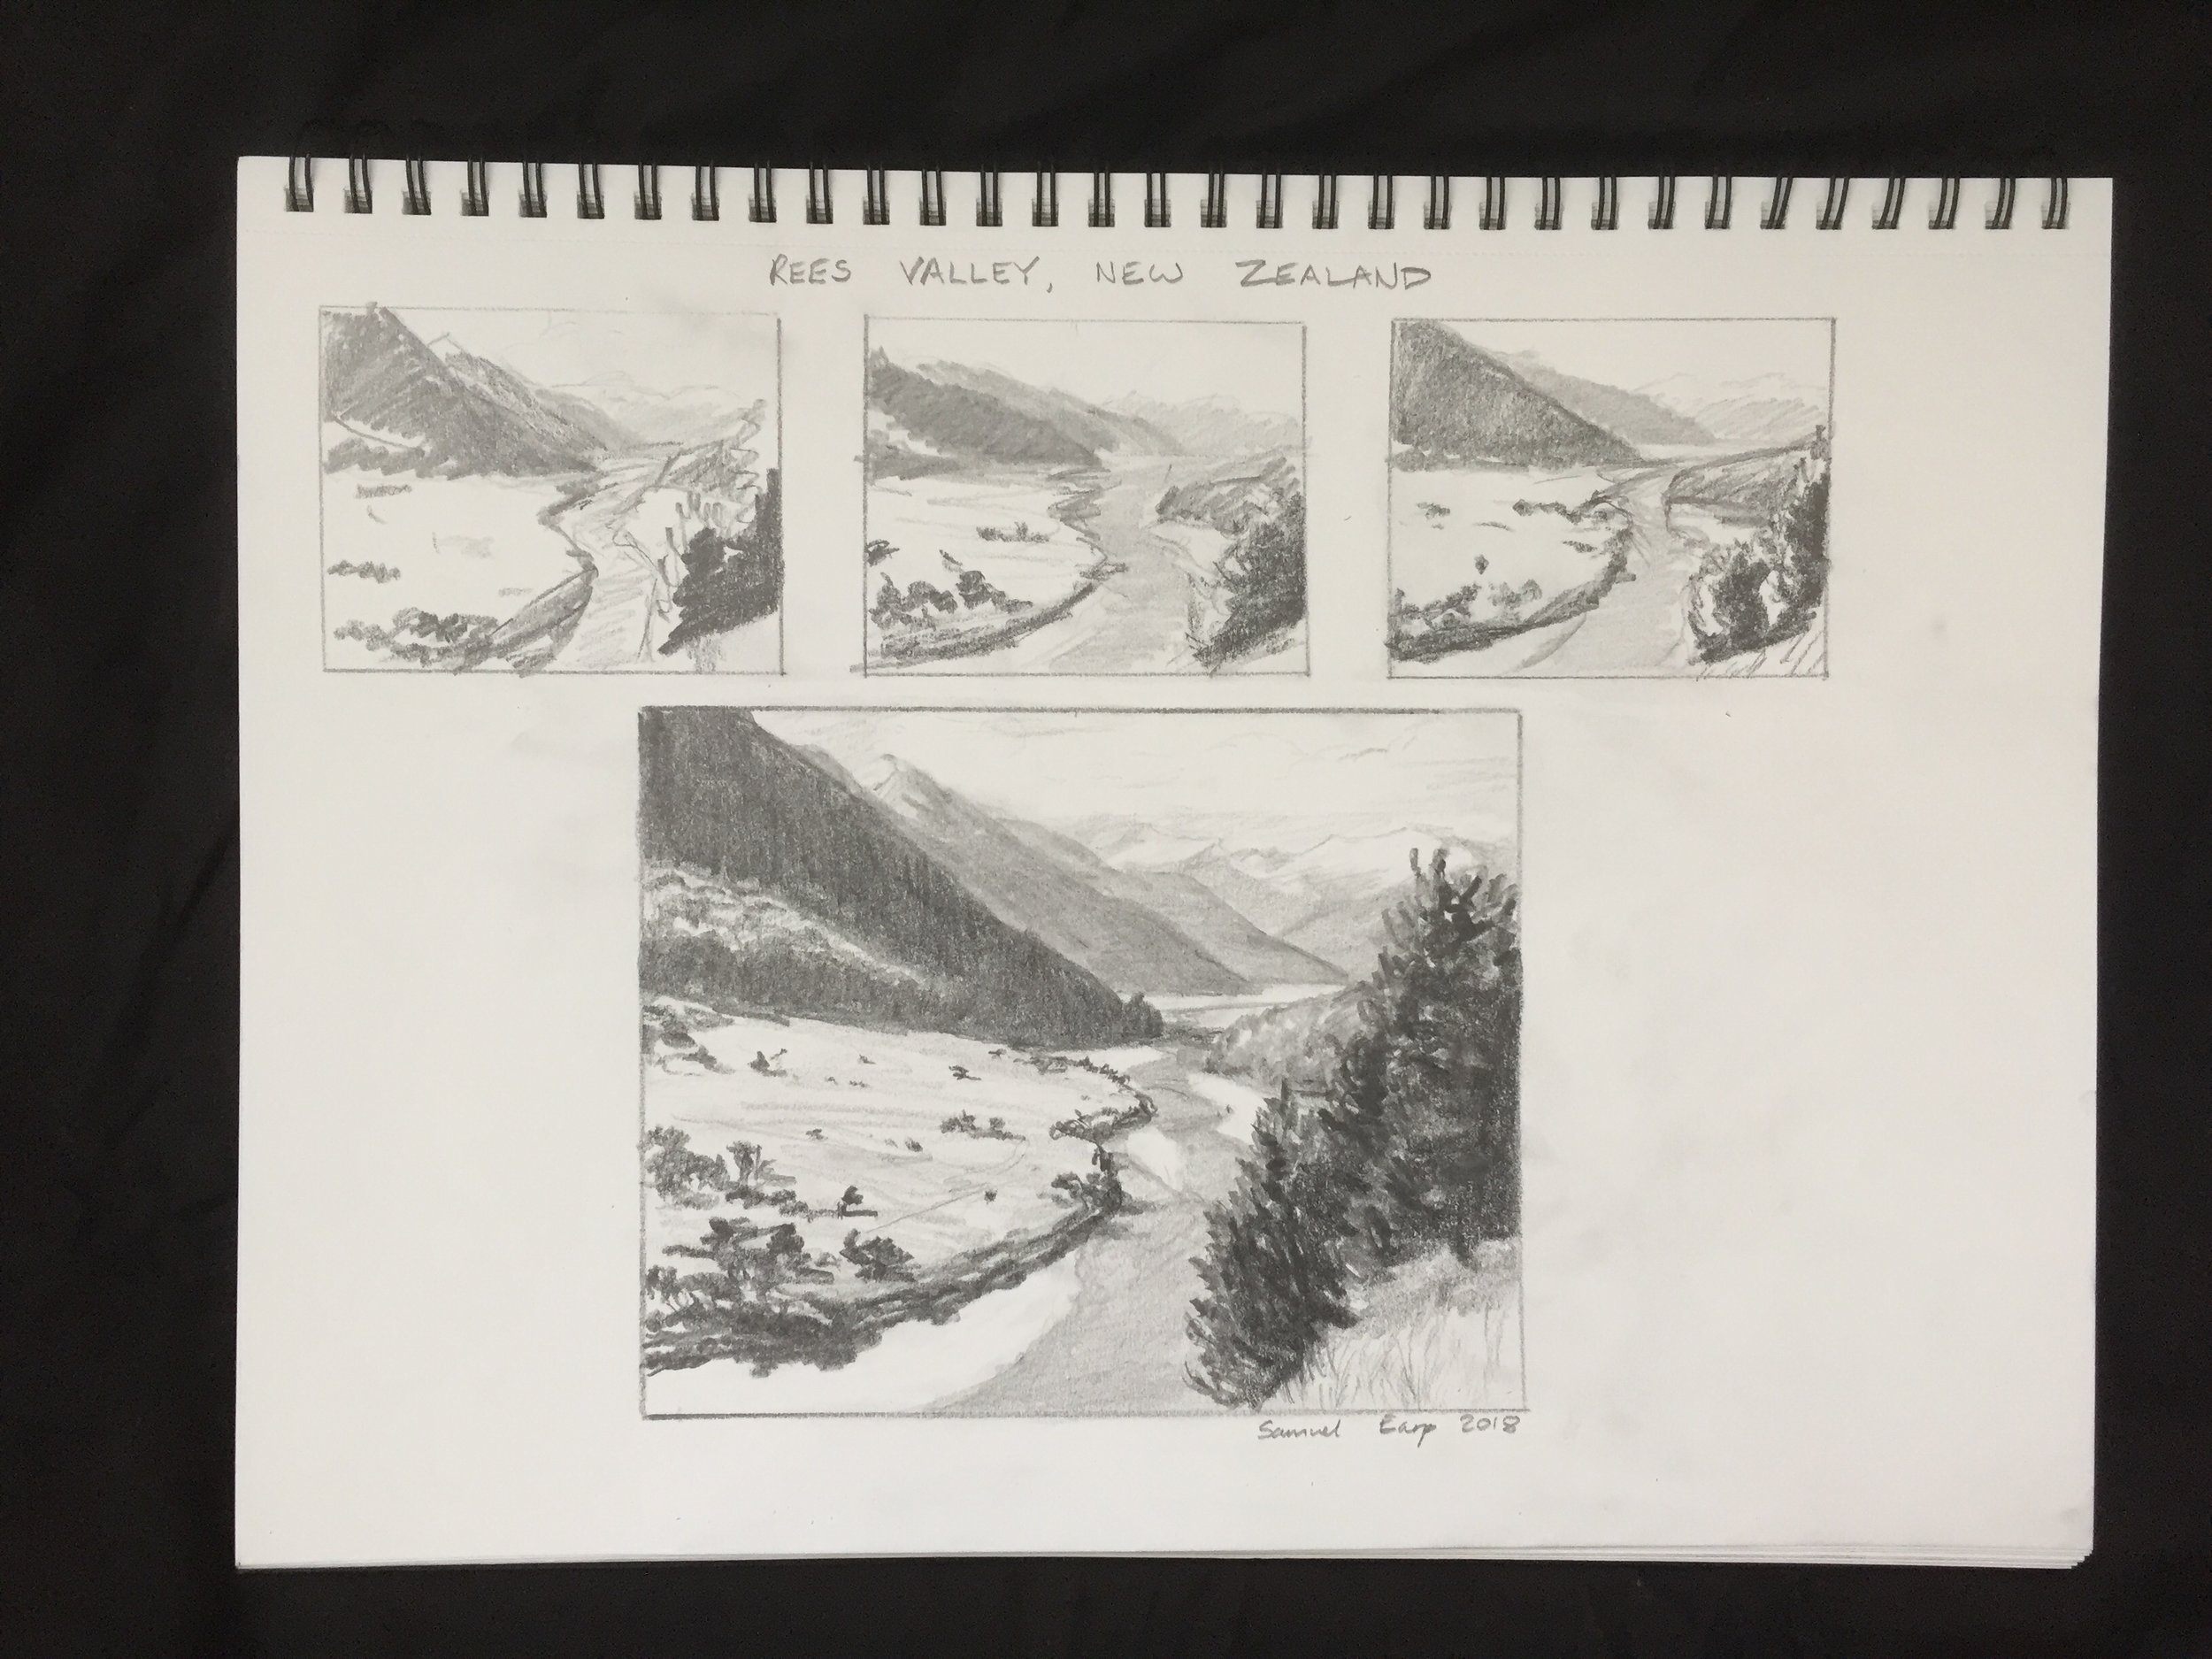 I use hard pencils to achieve the lighter values for the distant mountains. For the dark shadows in the foreground I use a soft 4B pencil.